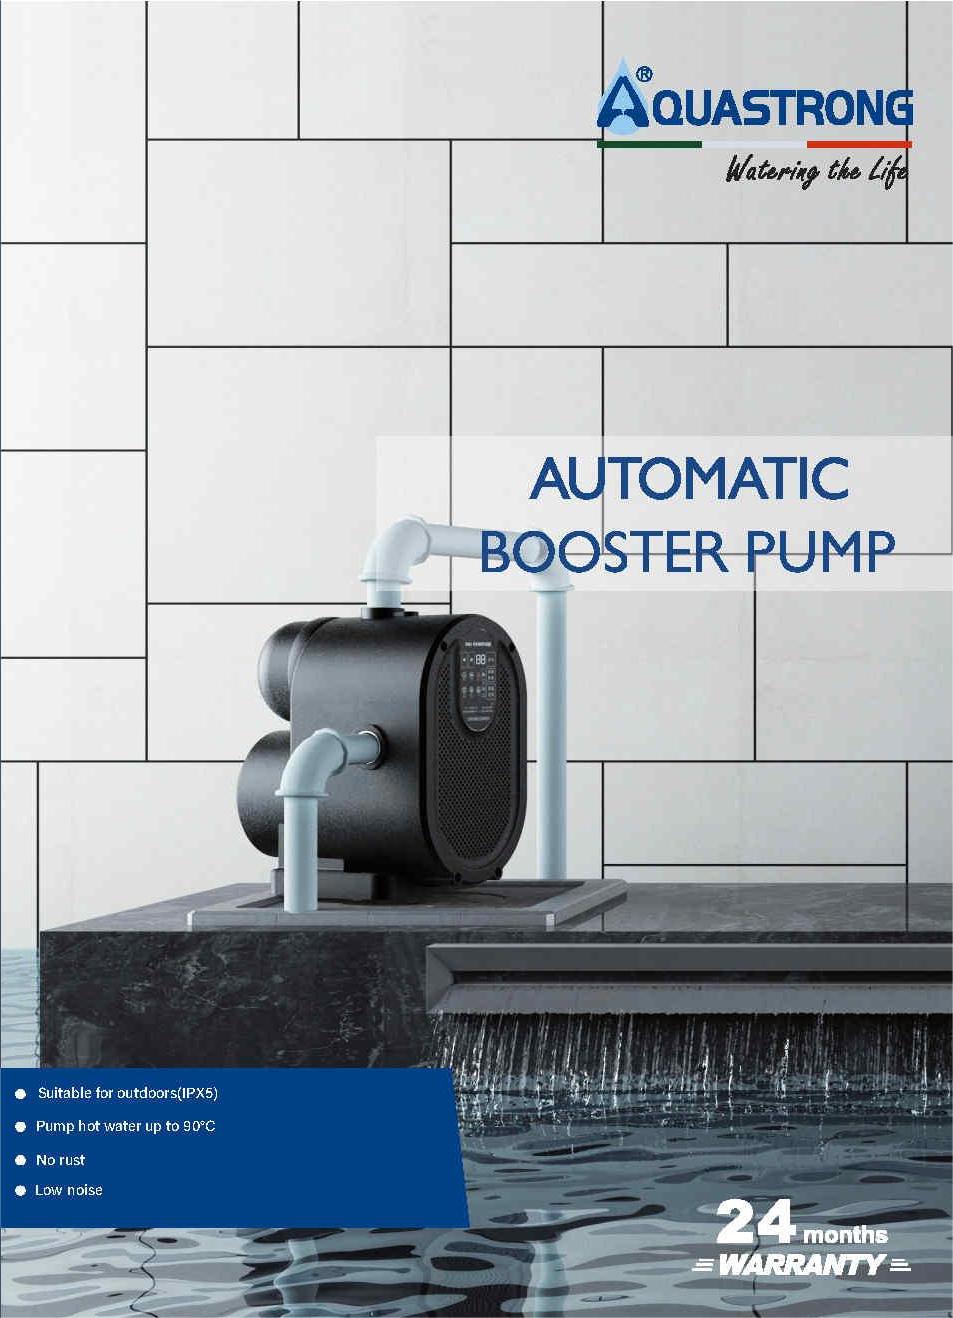 AQUASTRONG-G automatic booster catalogue 2023